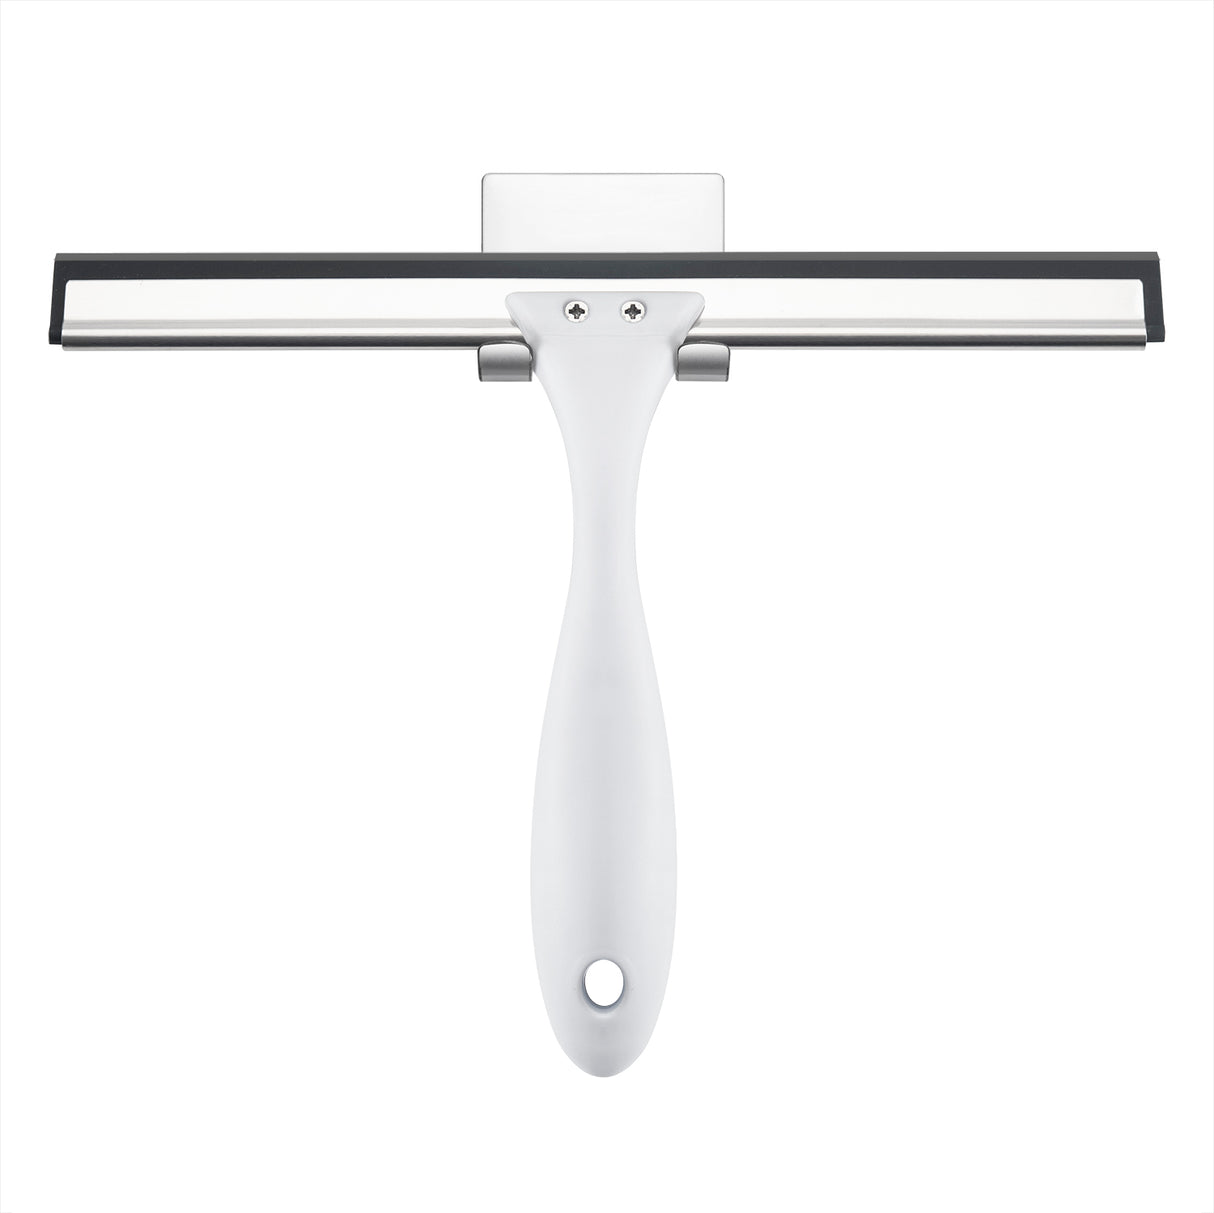 Squeegee for Shower Doors & Mirrors